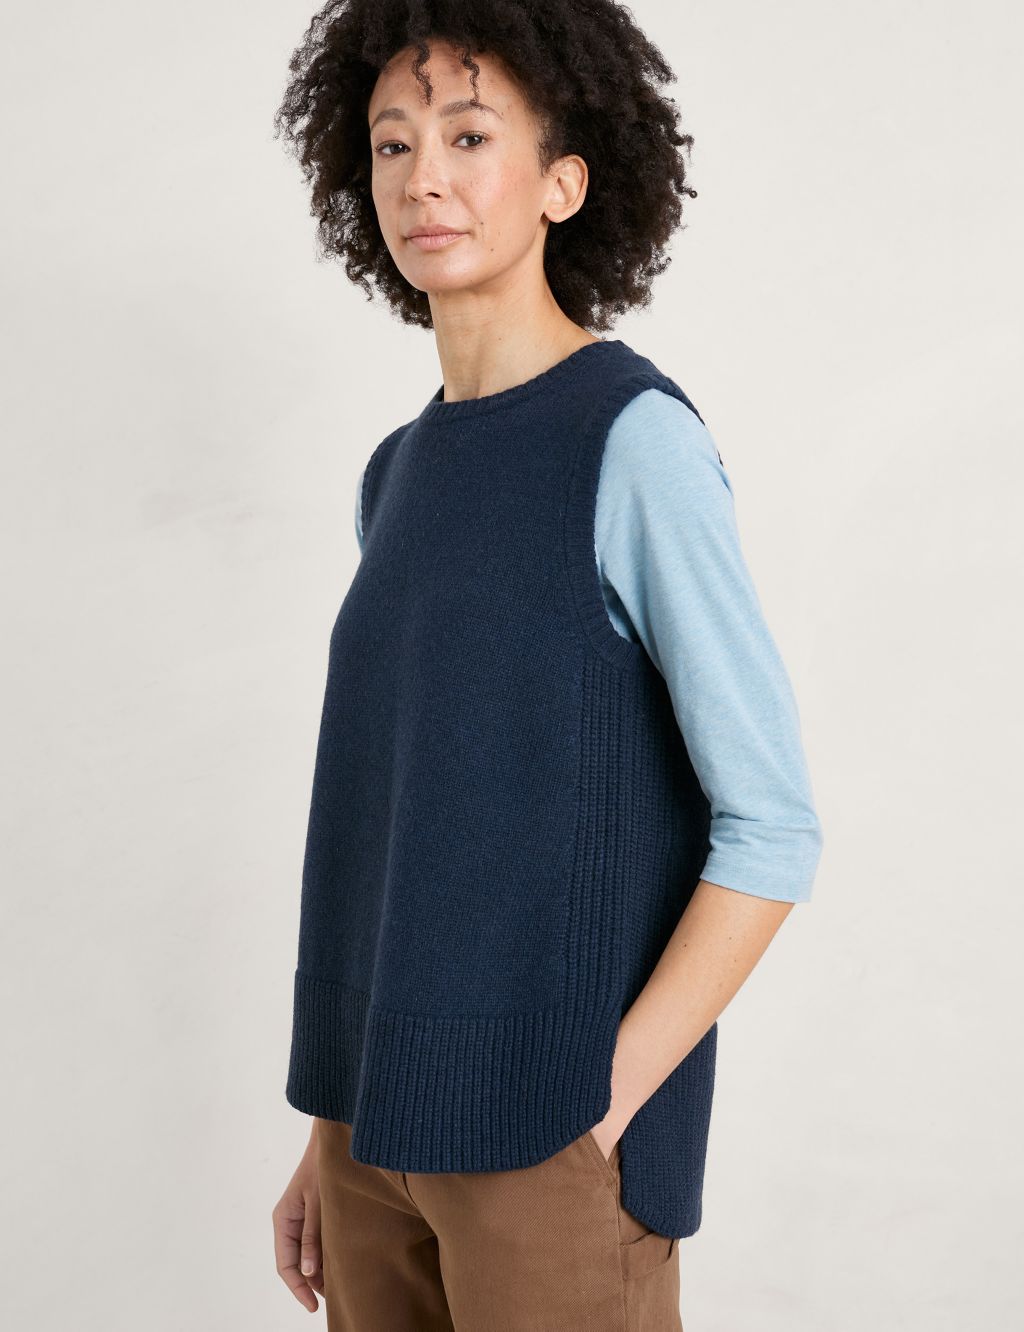 Merino Wool Rich Crew Neck Knitted Top image 3